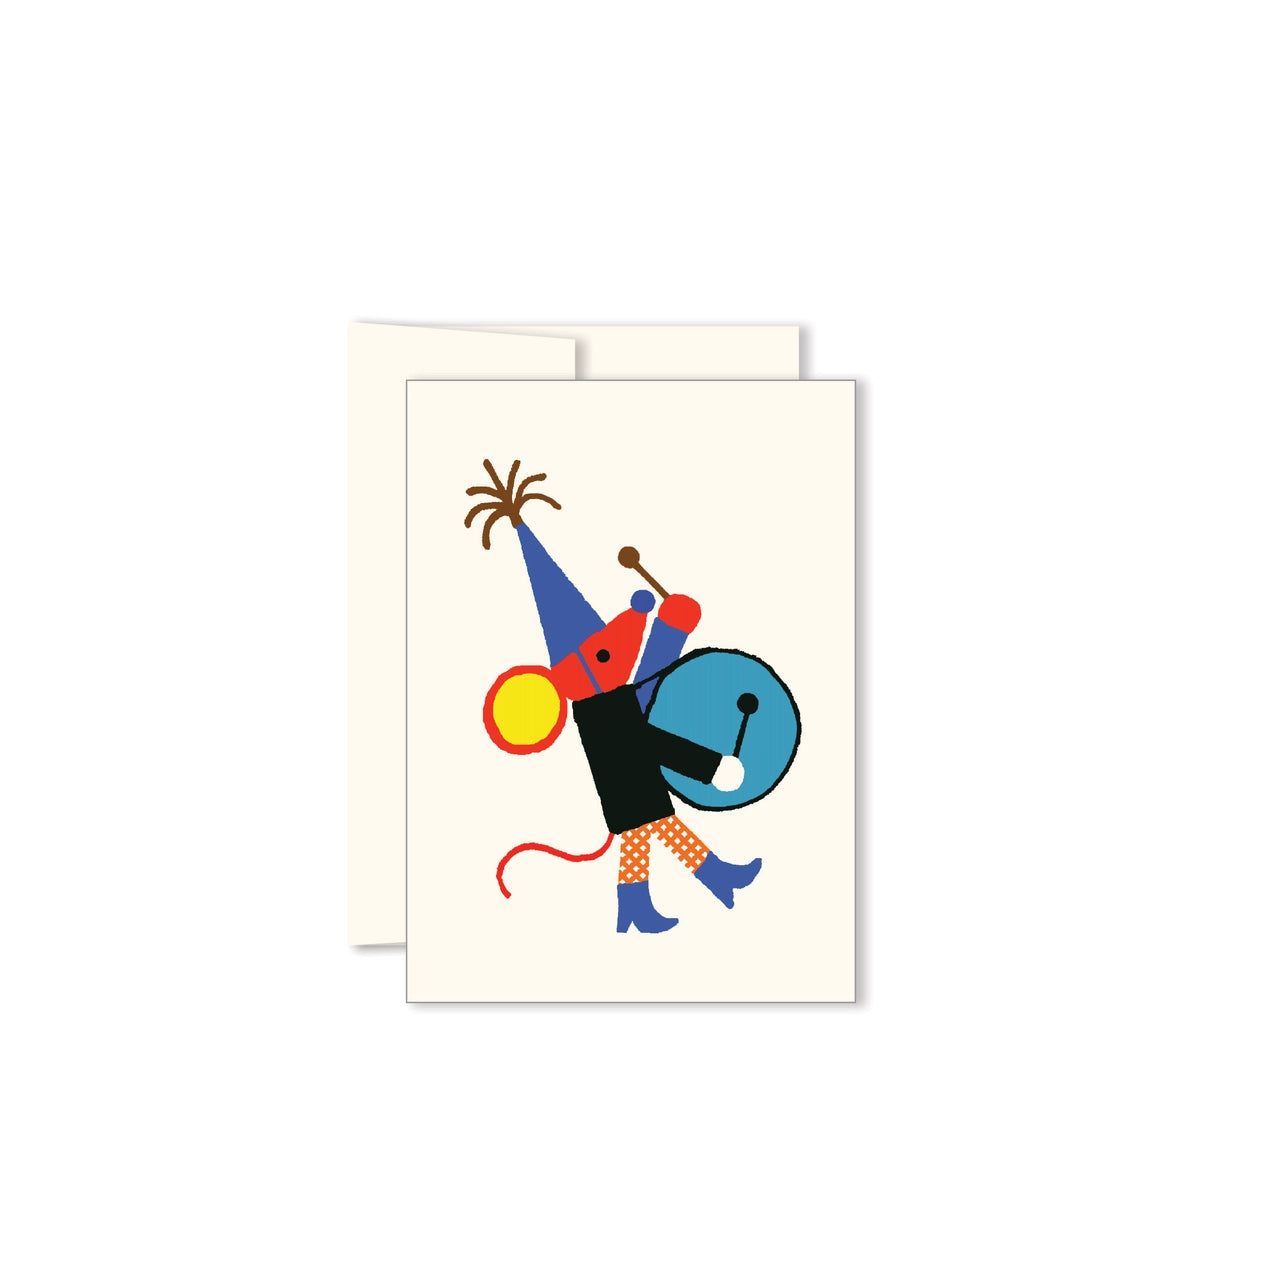 Souris Miniature Greeting Card · Paperole